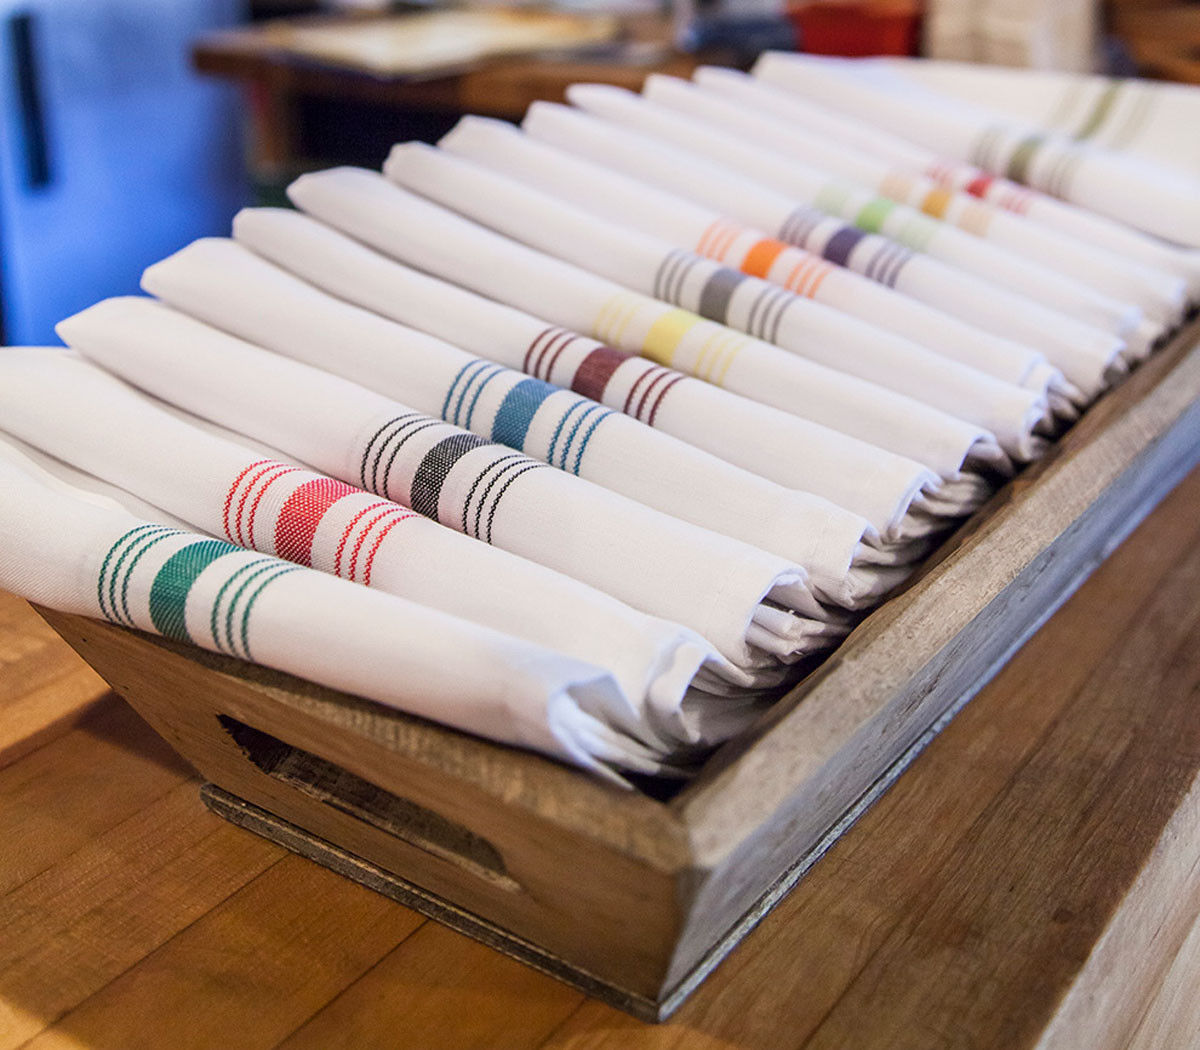 What fabric material is used in the Milliken Signature Stripe Bistro Napkins?